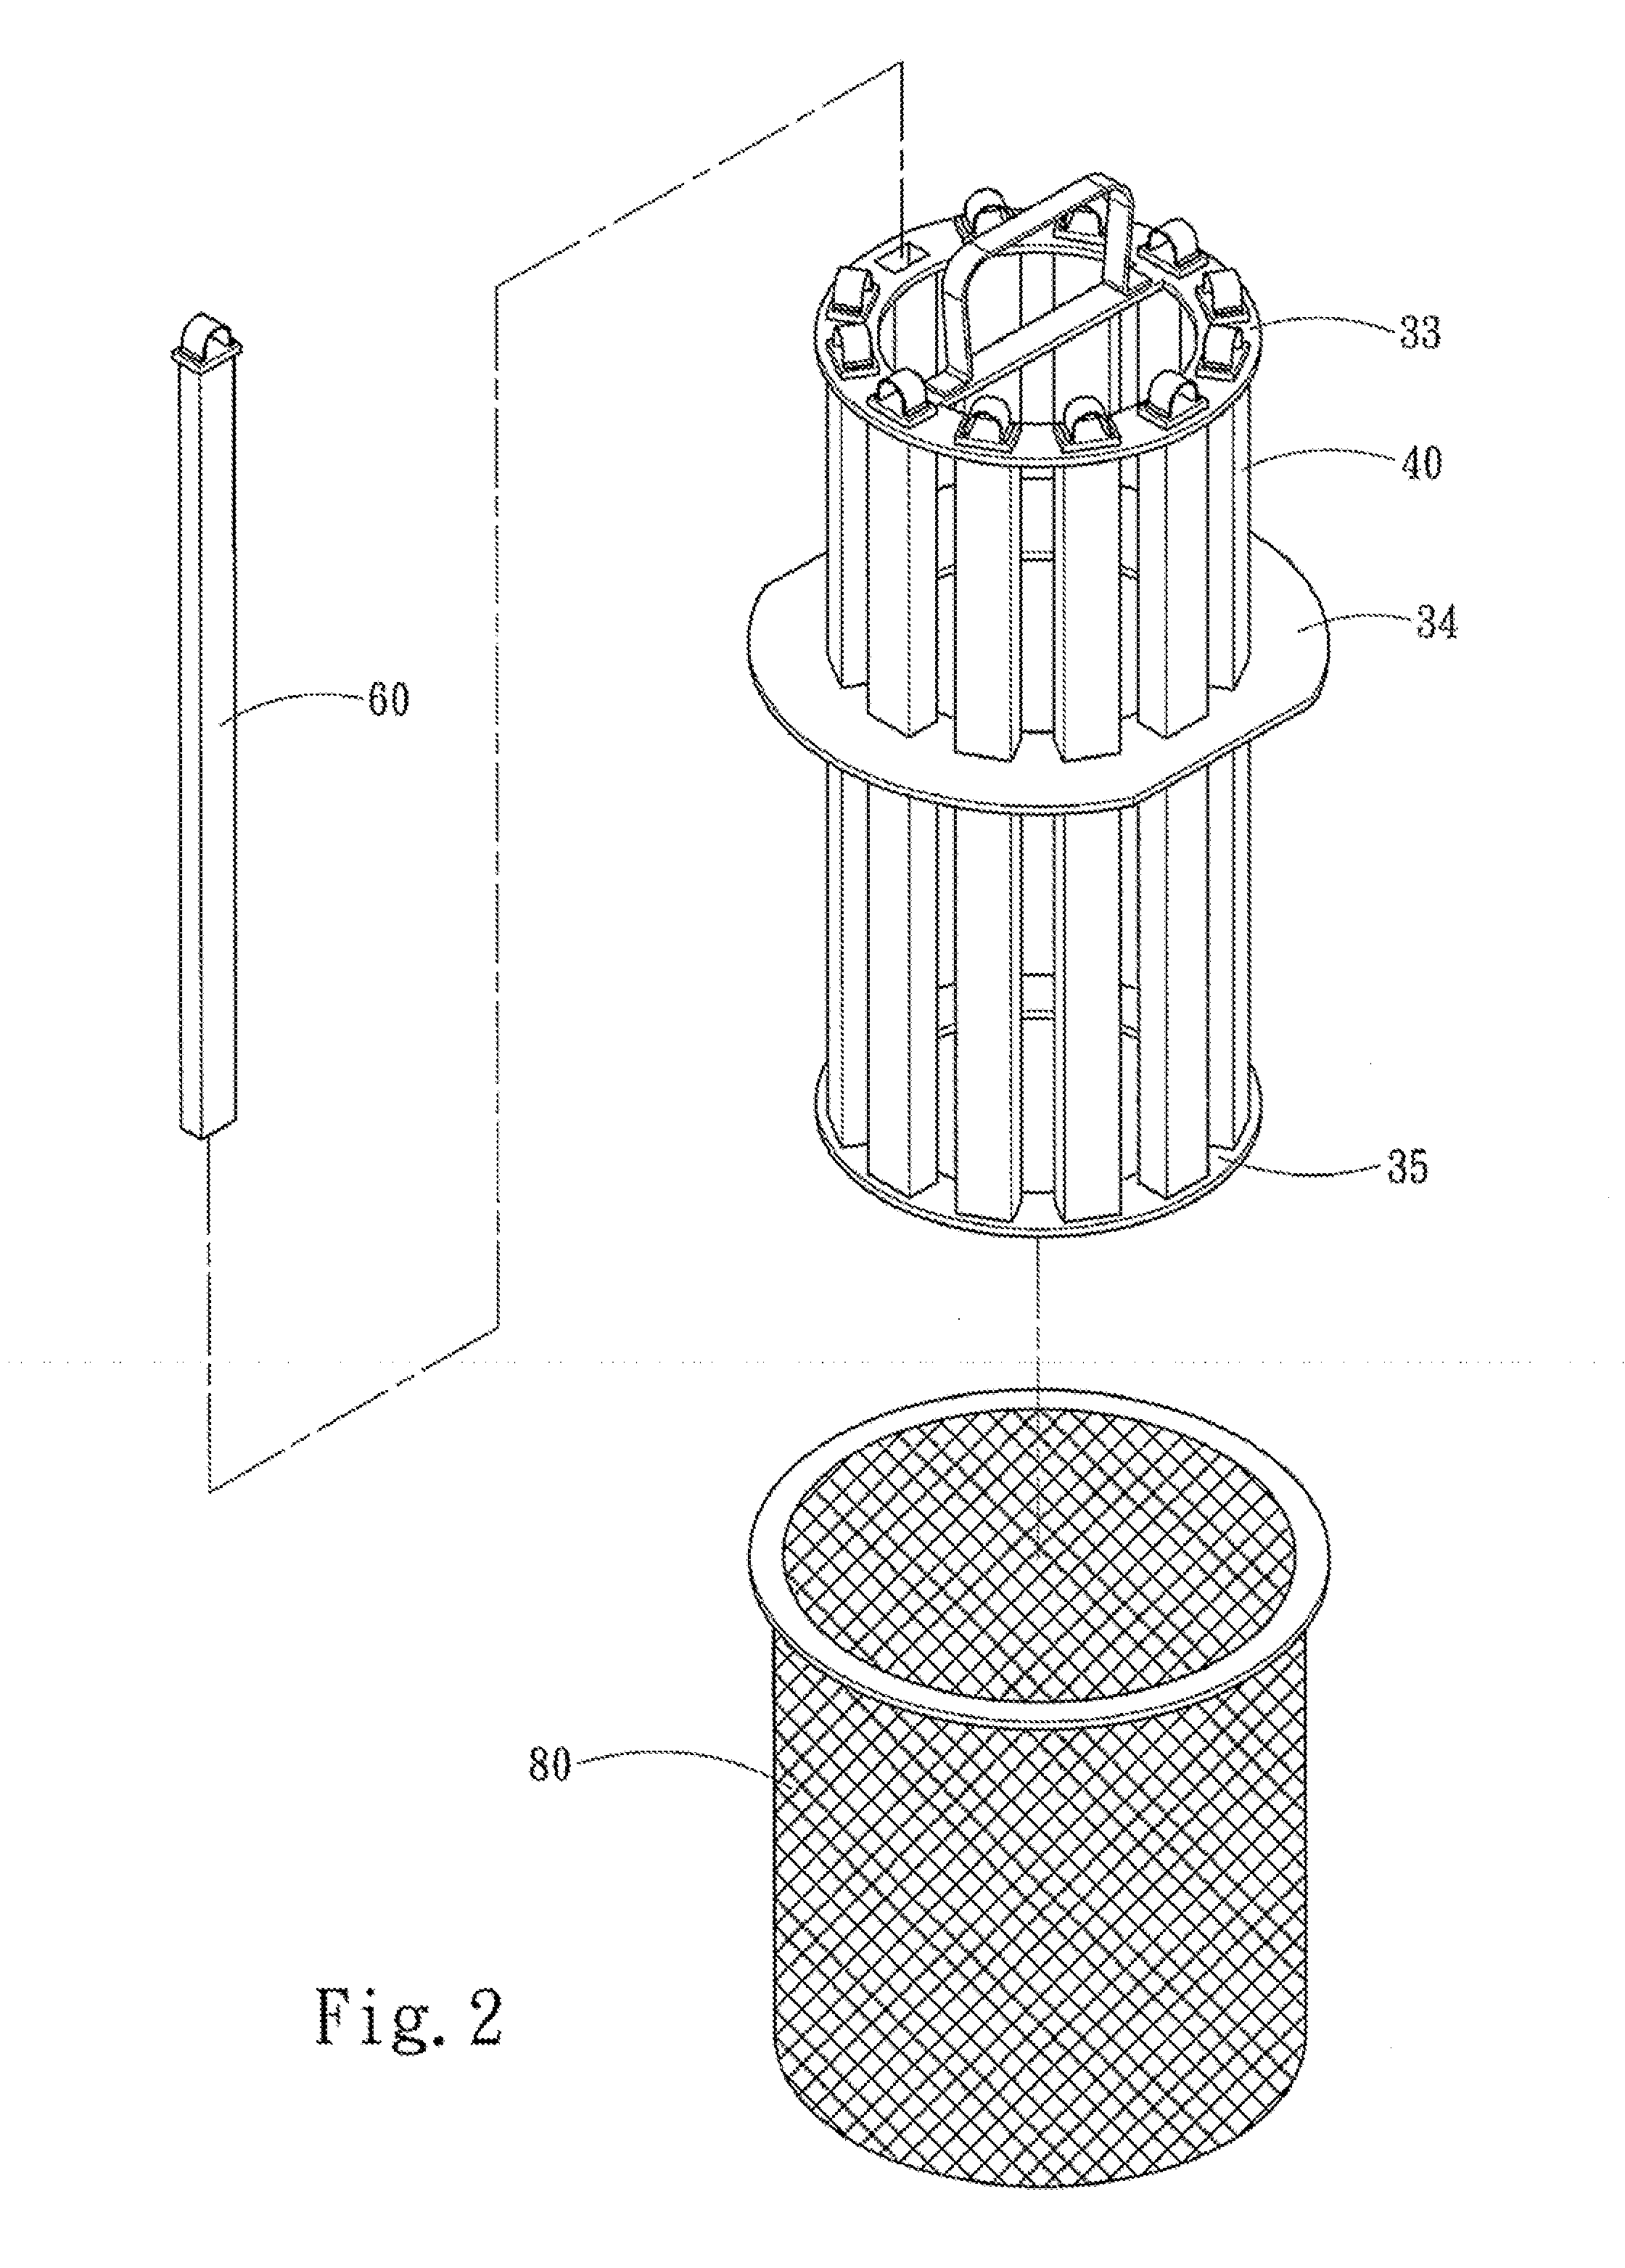 Process and Apparatus for Online Rejuvenation of Contaminated Sulfolane Solvent